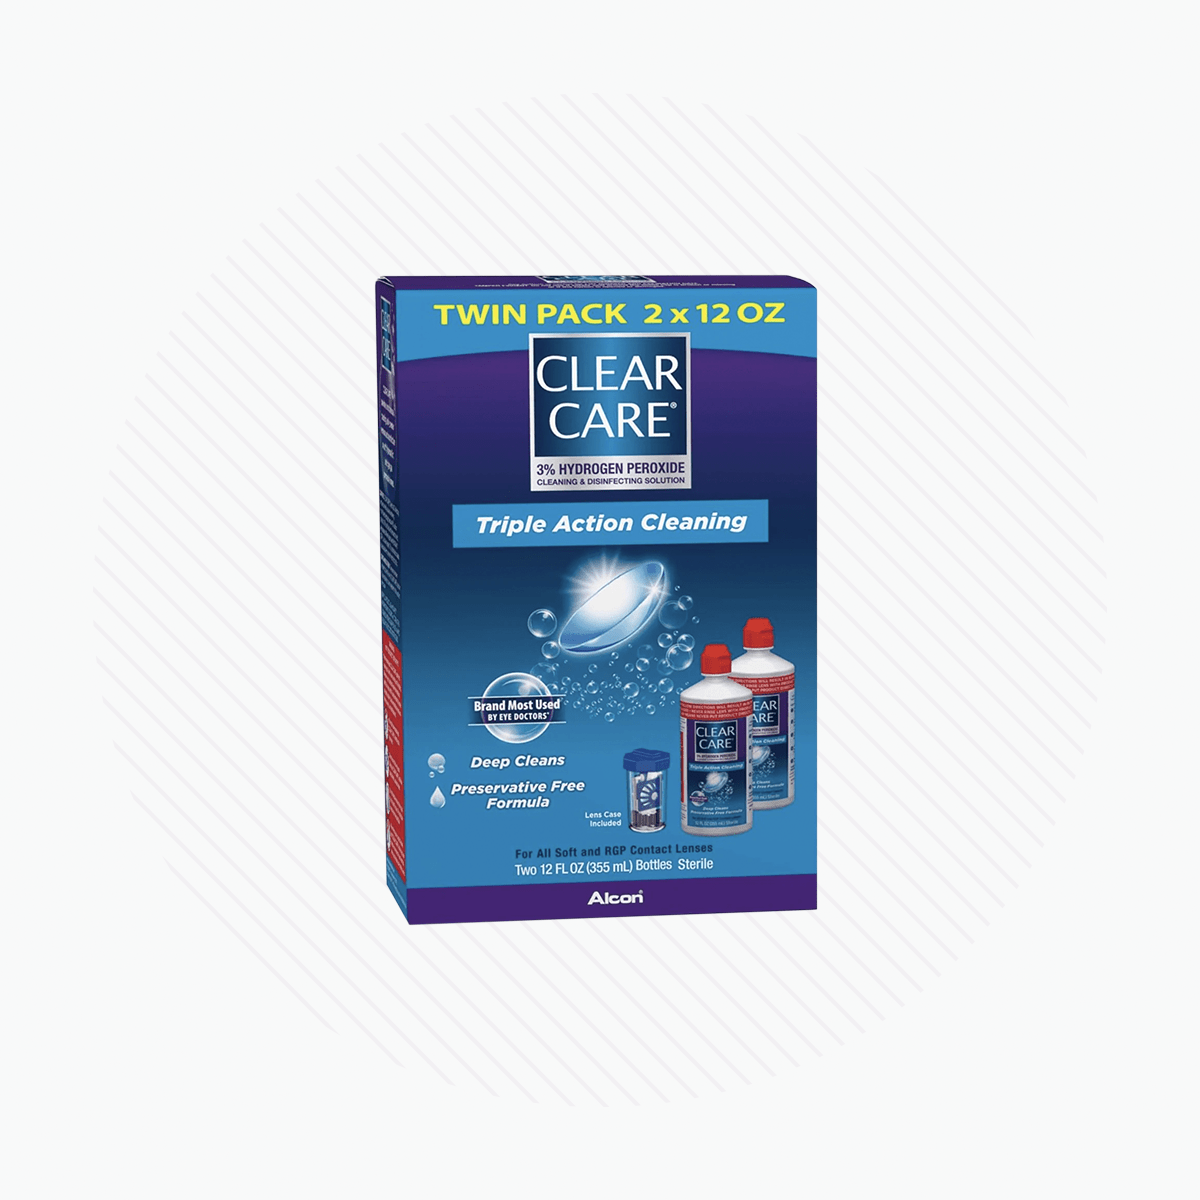 Clear Care Triple Action Cleaning and Disinfecting Solution with Case